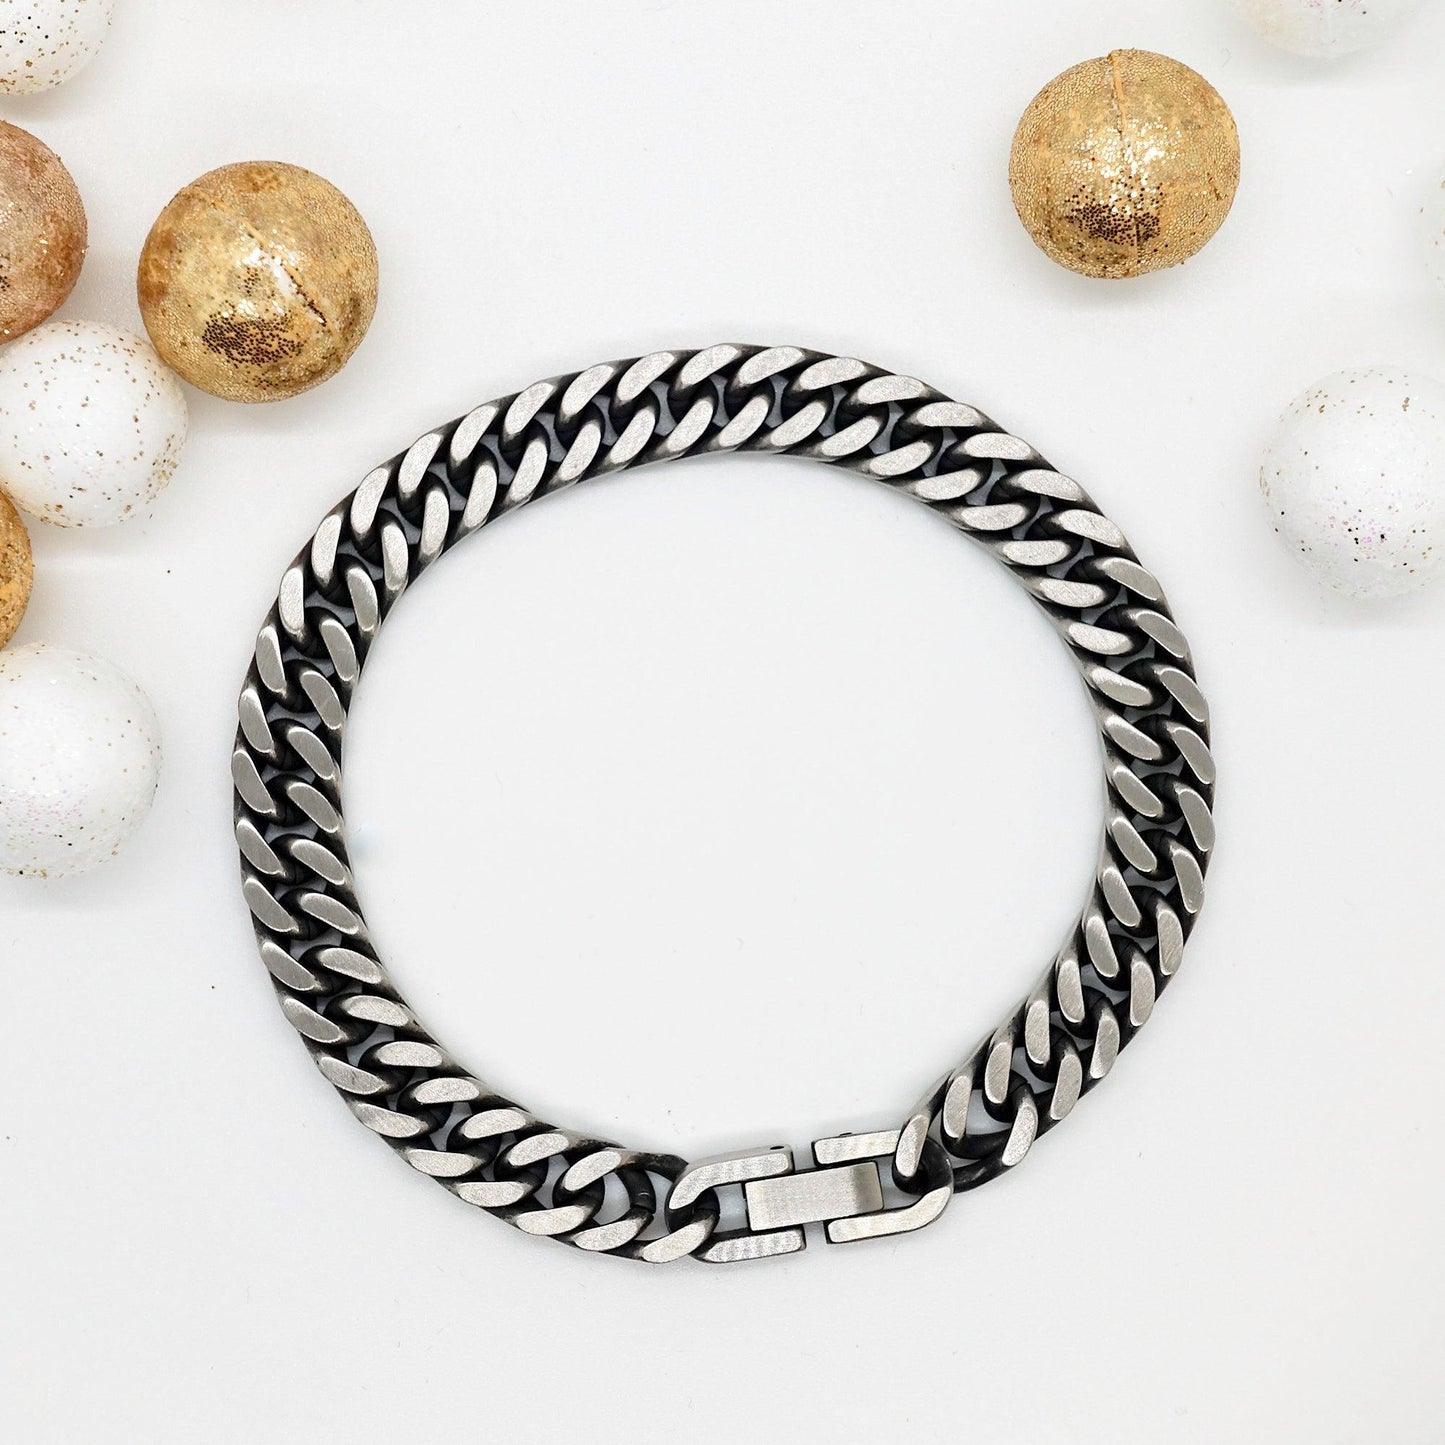 Remarkable Dancer Gifts, Your dedication and hard work, Inspirational Birthday Christmas Unique Cuban Link Chain Bracelet For Dancer, Coworkers, Men, Women, Friends - Mallard Moon Gift Shop